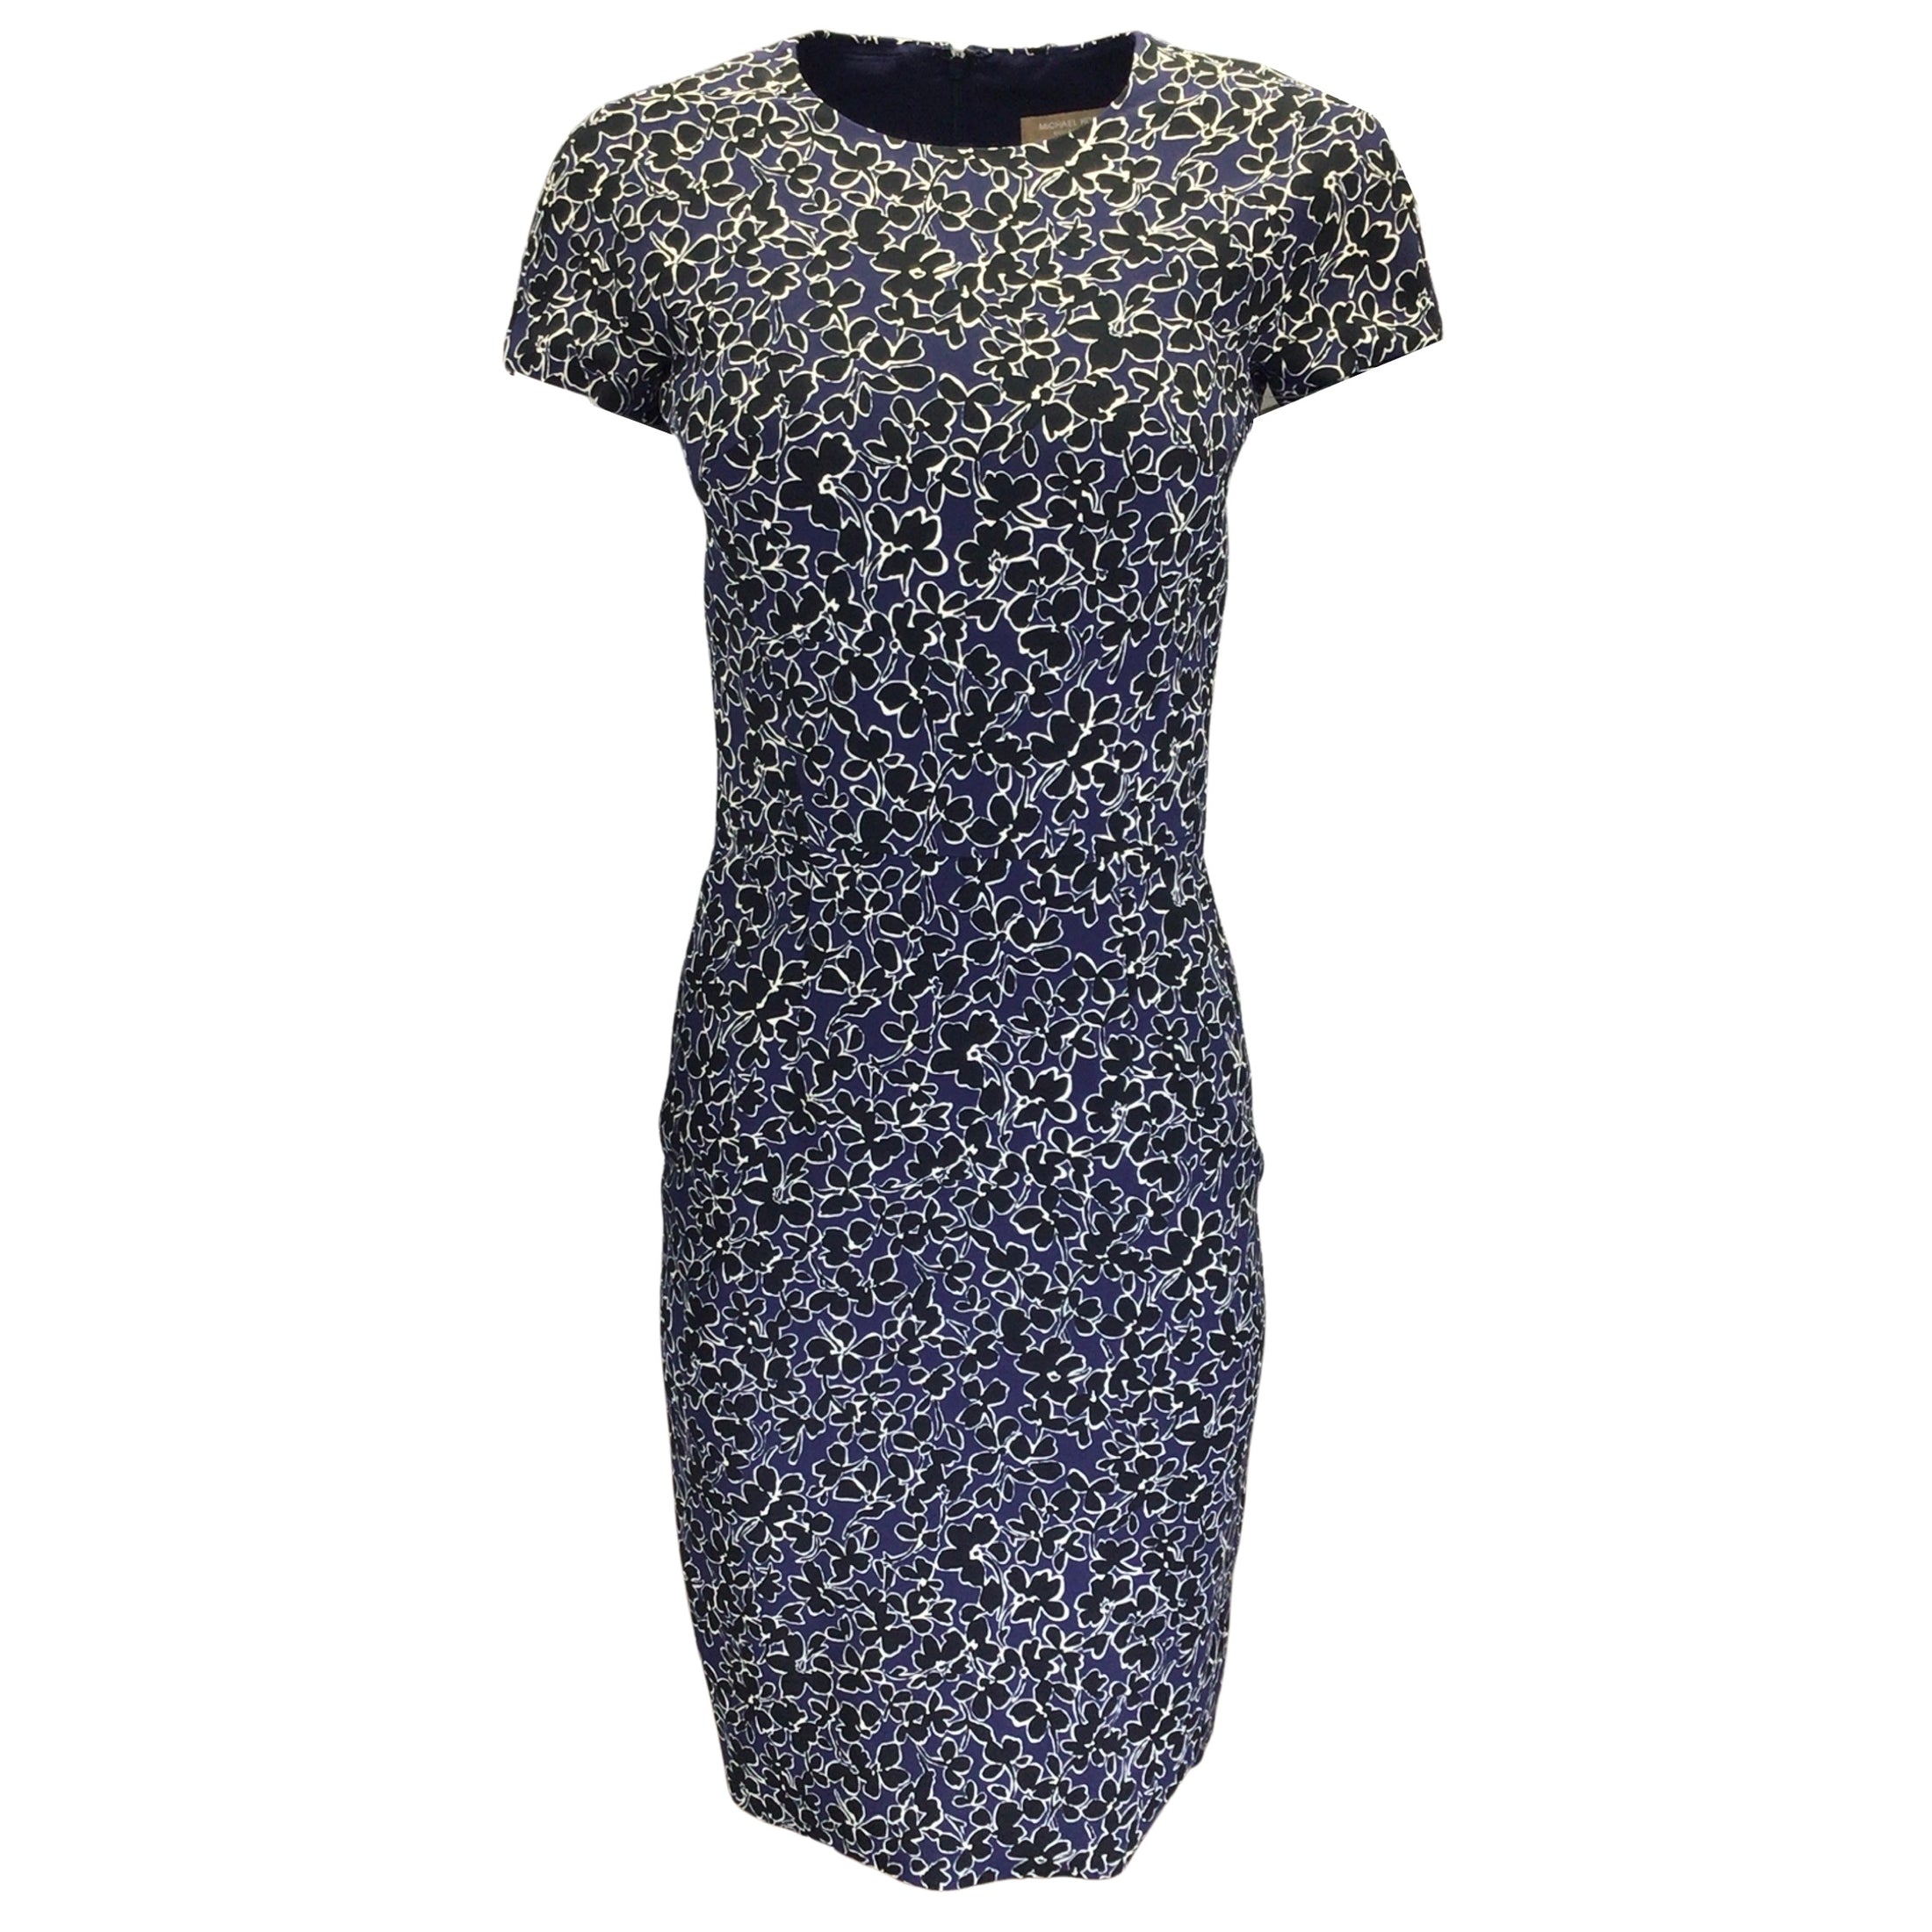 Michael Kors Collection Navy Blue / White / Black Floral Printed Short Sleeved Cady Midi Dress